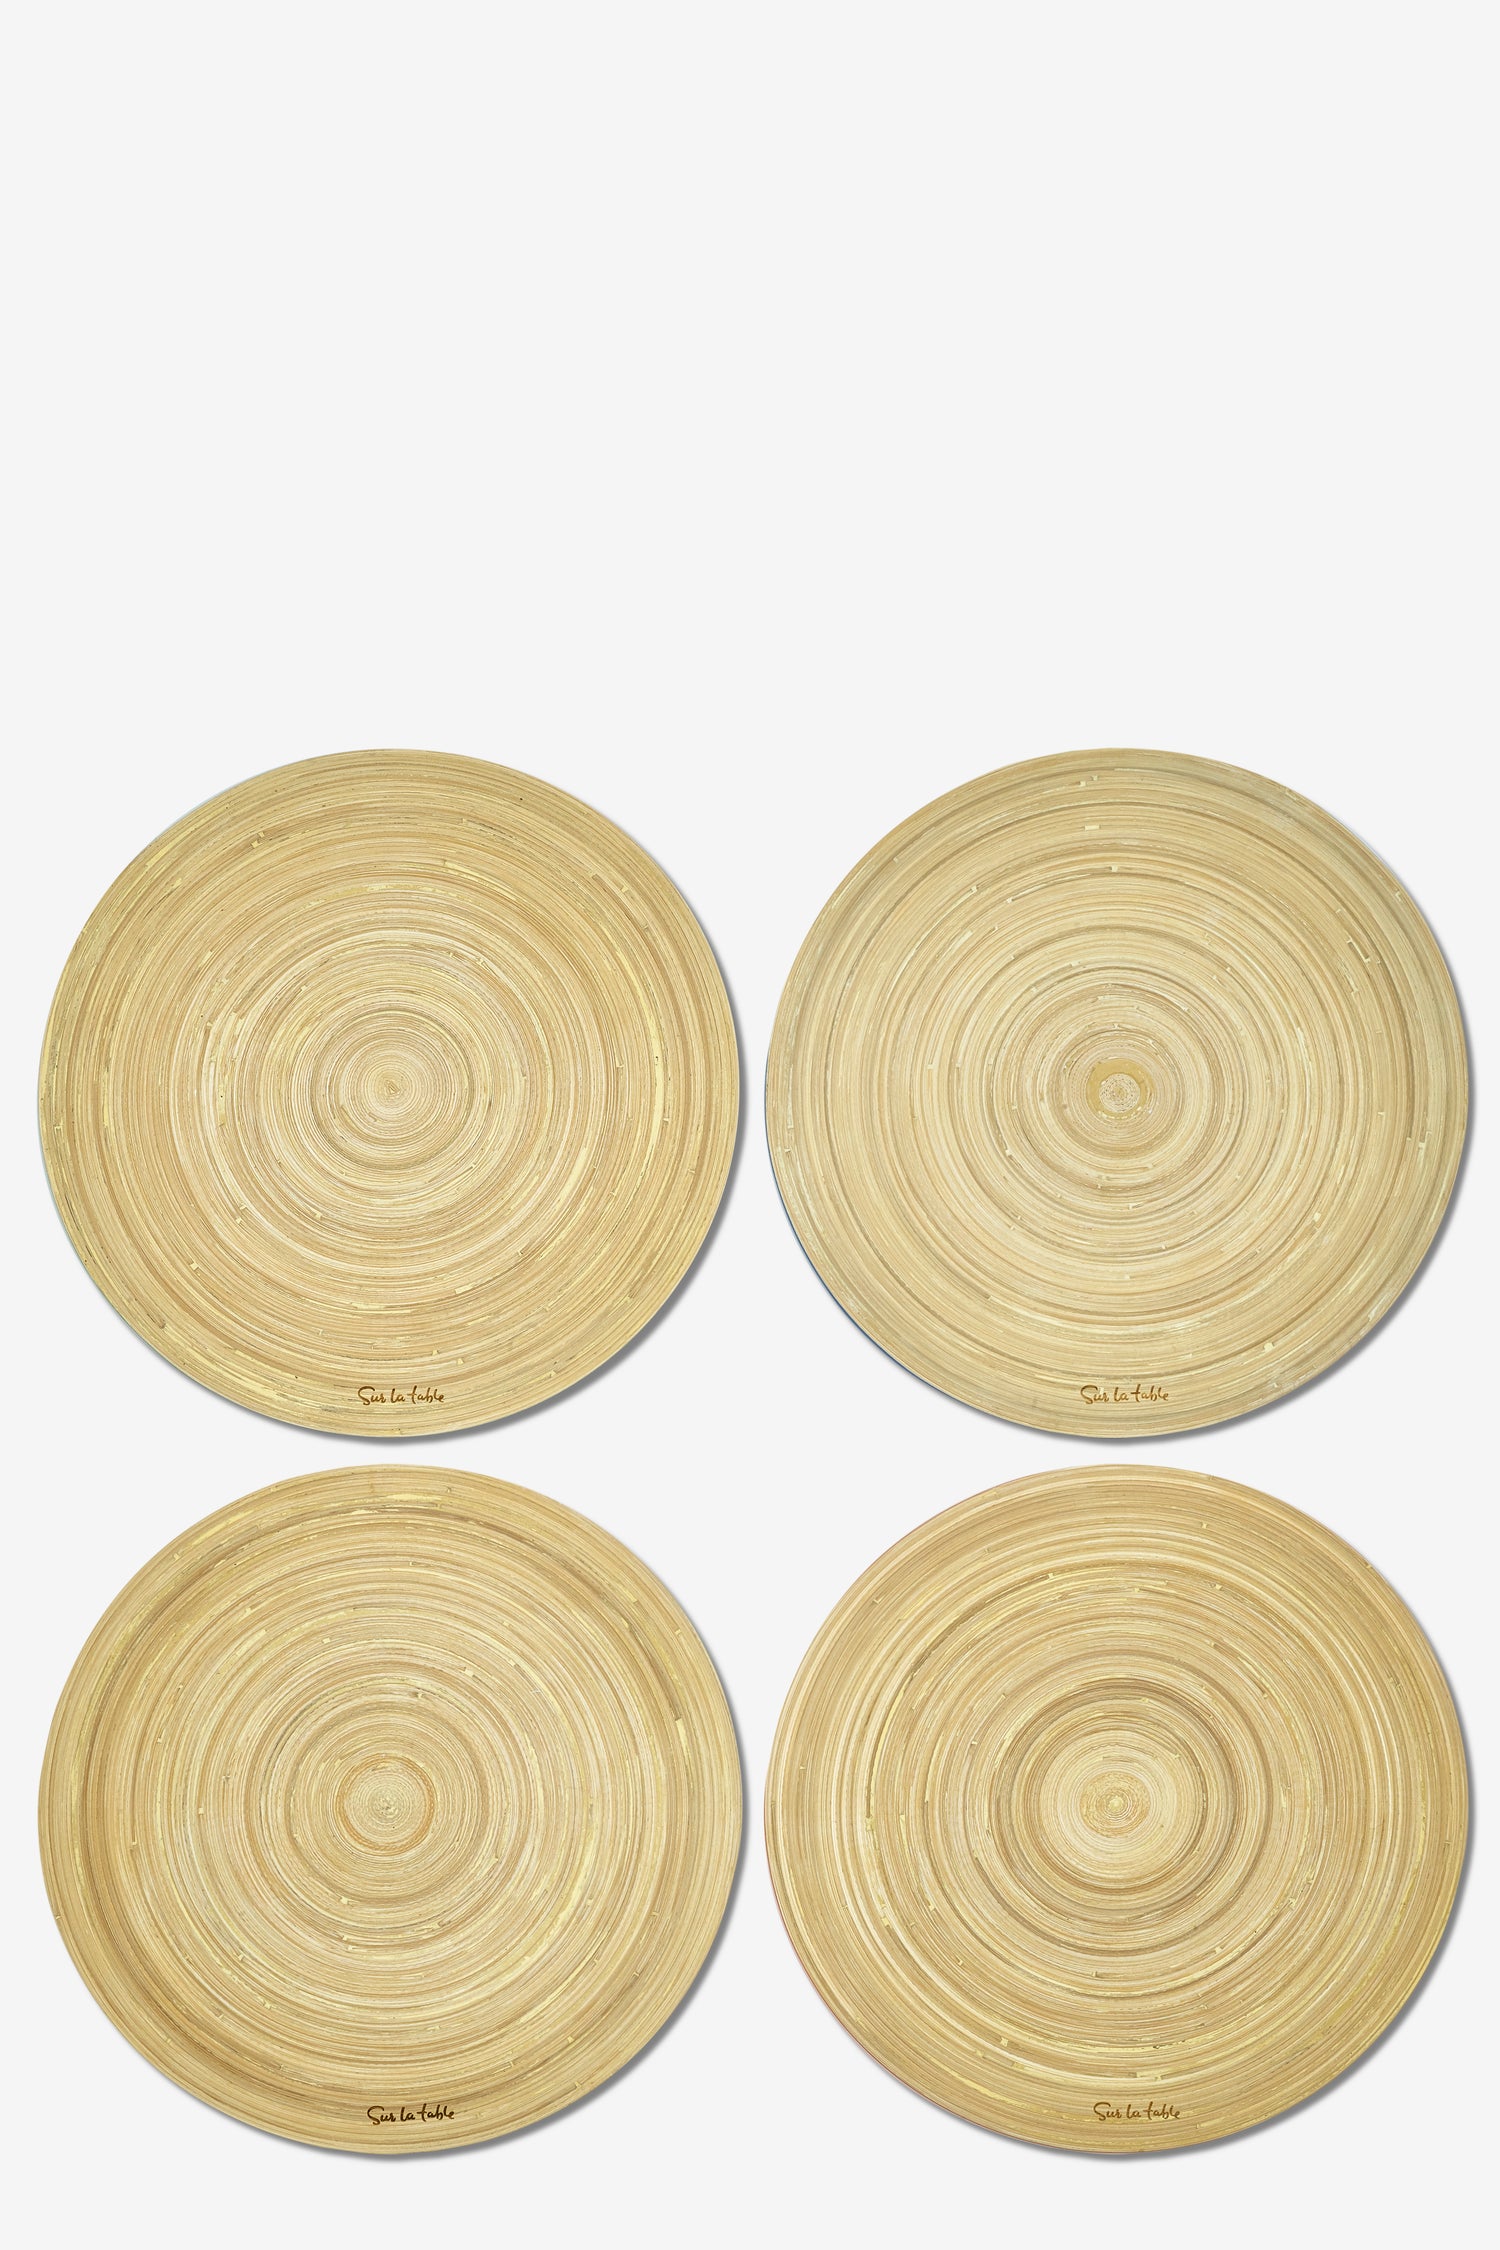 Sur La Table Bamboo Round Placemats (Set of 4)